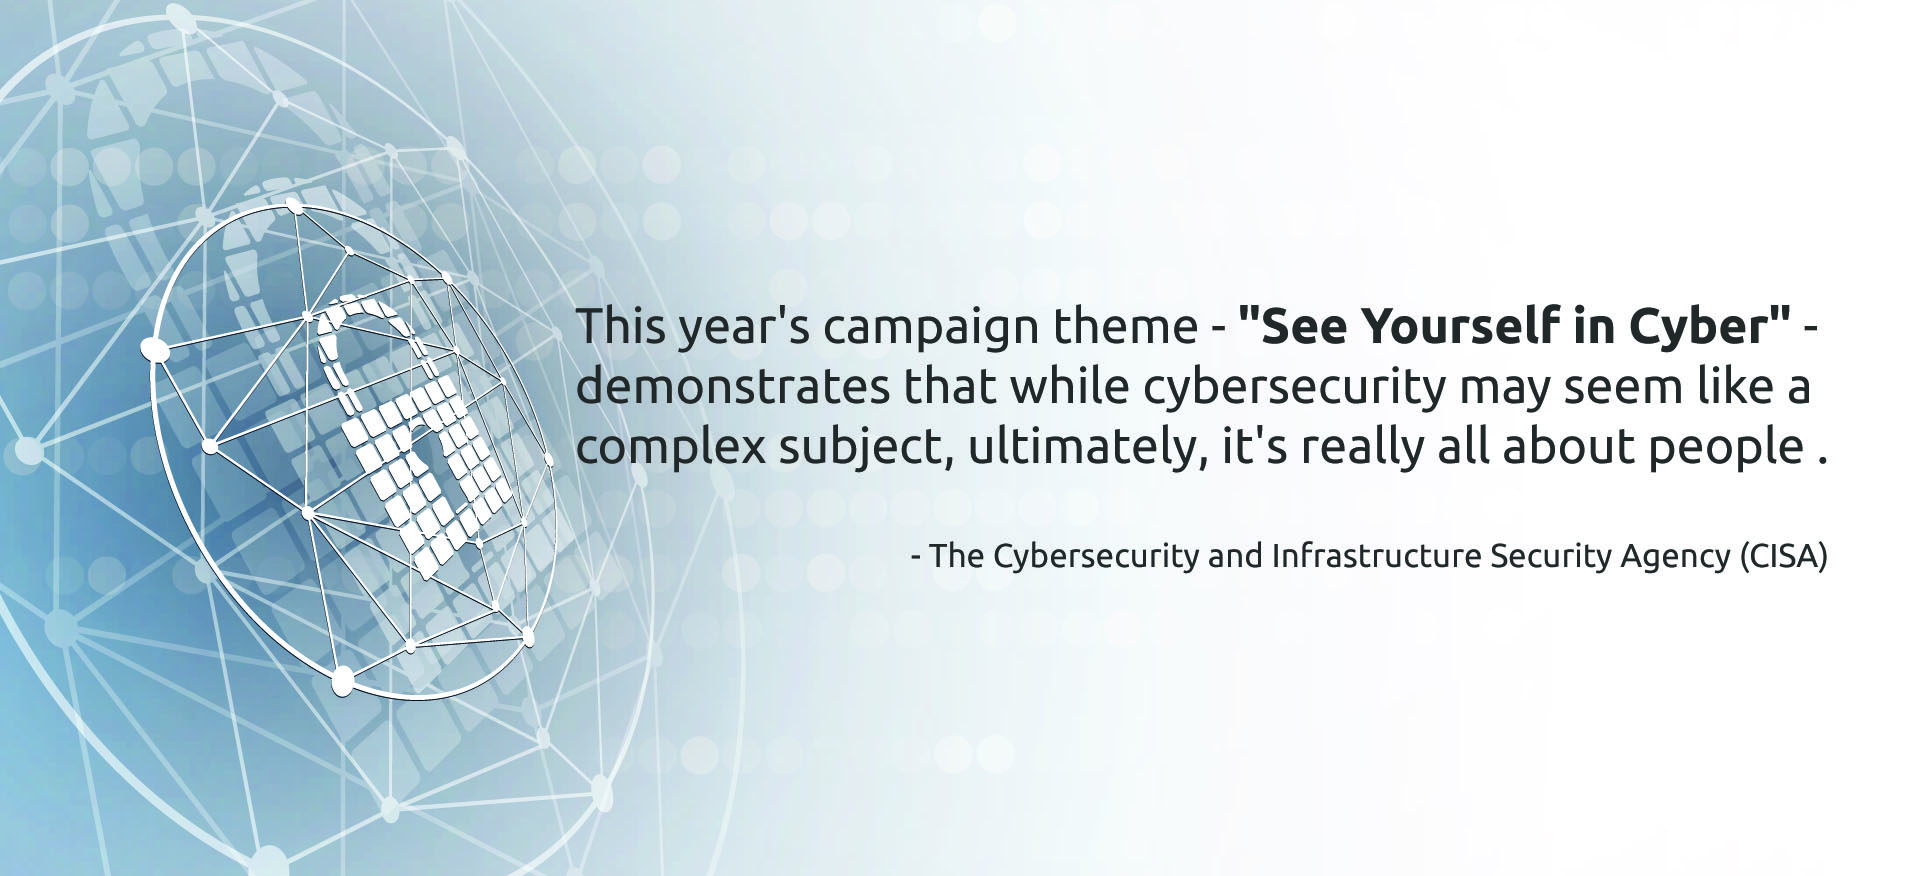 "This year's campaign theme - "See Yourself in Cyber" - demonstrates that while cybersecurity may seem like a complex subject, ultimately, it's really all about people ." - The Cybersecurity and Infrastructure Security Agency (CISA).